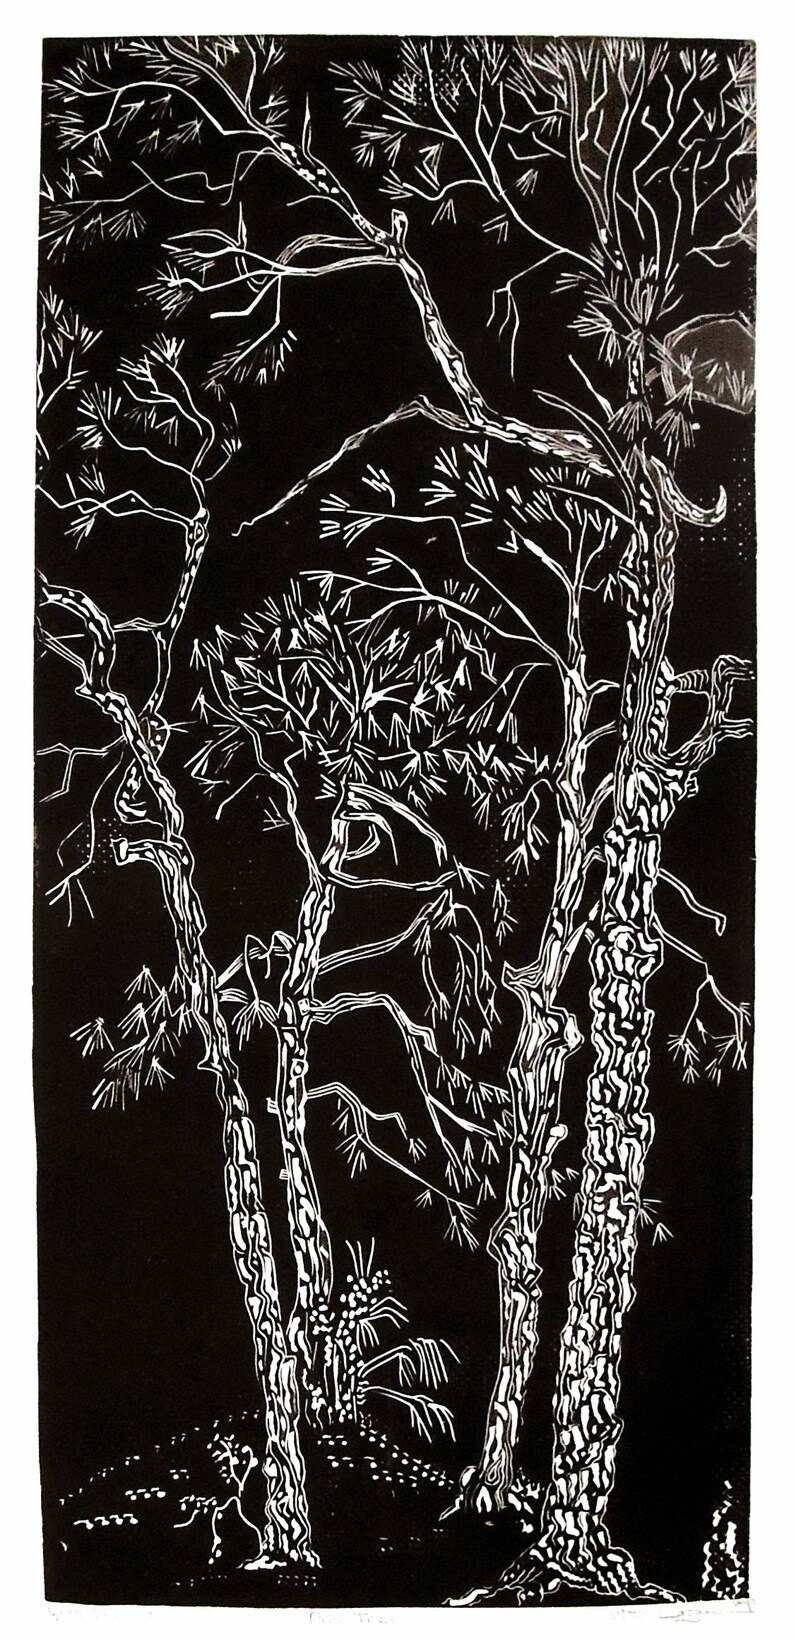 Pines, limited edition, hand printed, hand signed in pencil by the artist, linocut image 1